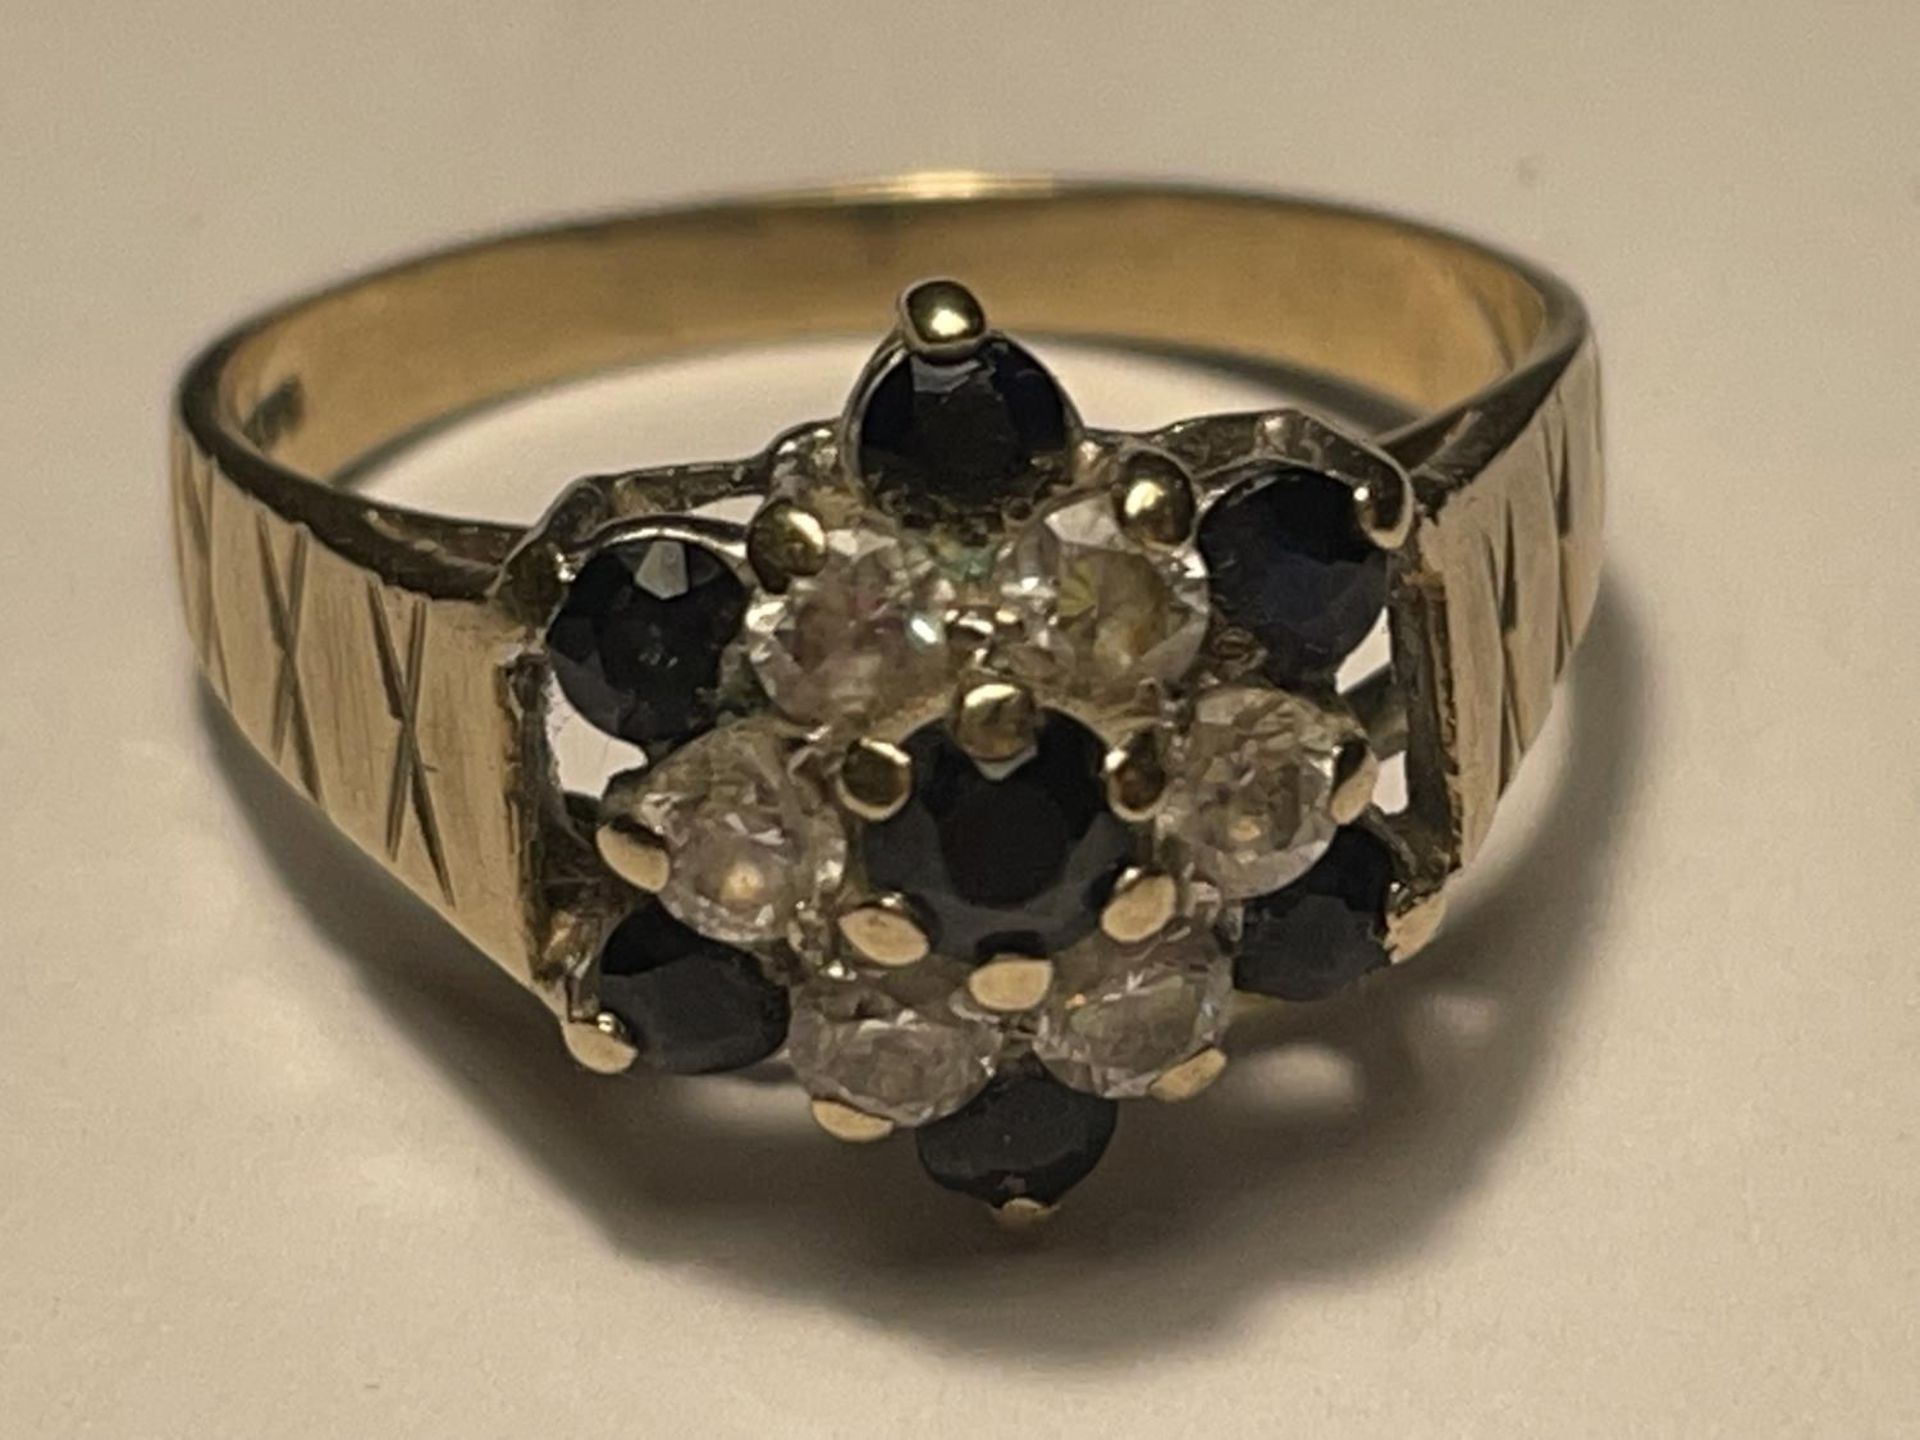 A 9 CARAT GOLD RING WITH SAPPHIRES AND CUBIC ZIRCONIAS IN A FLOWER DESIGN SIZE R